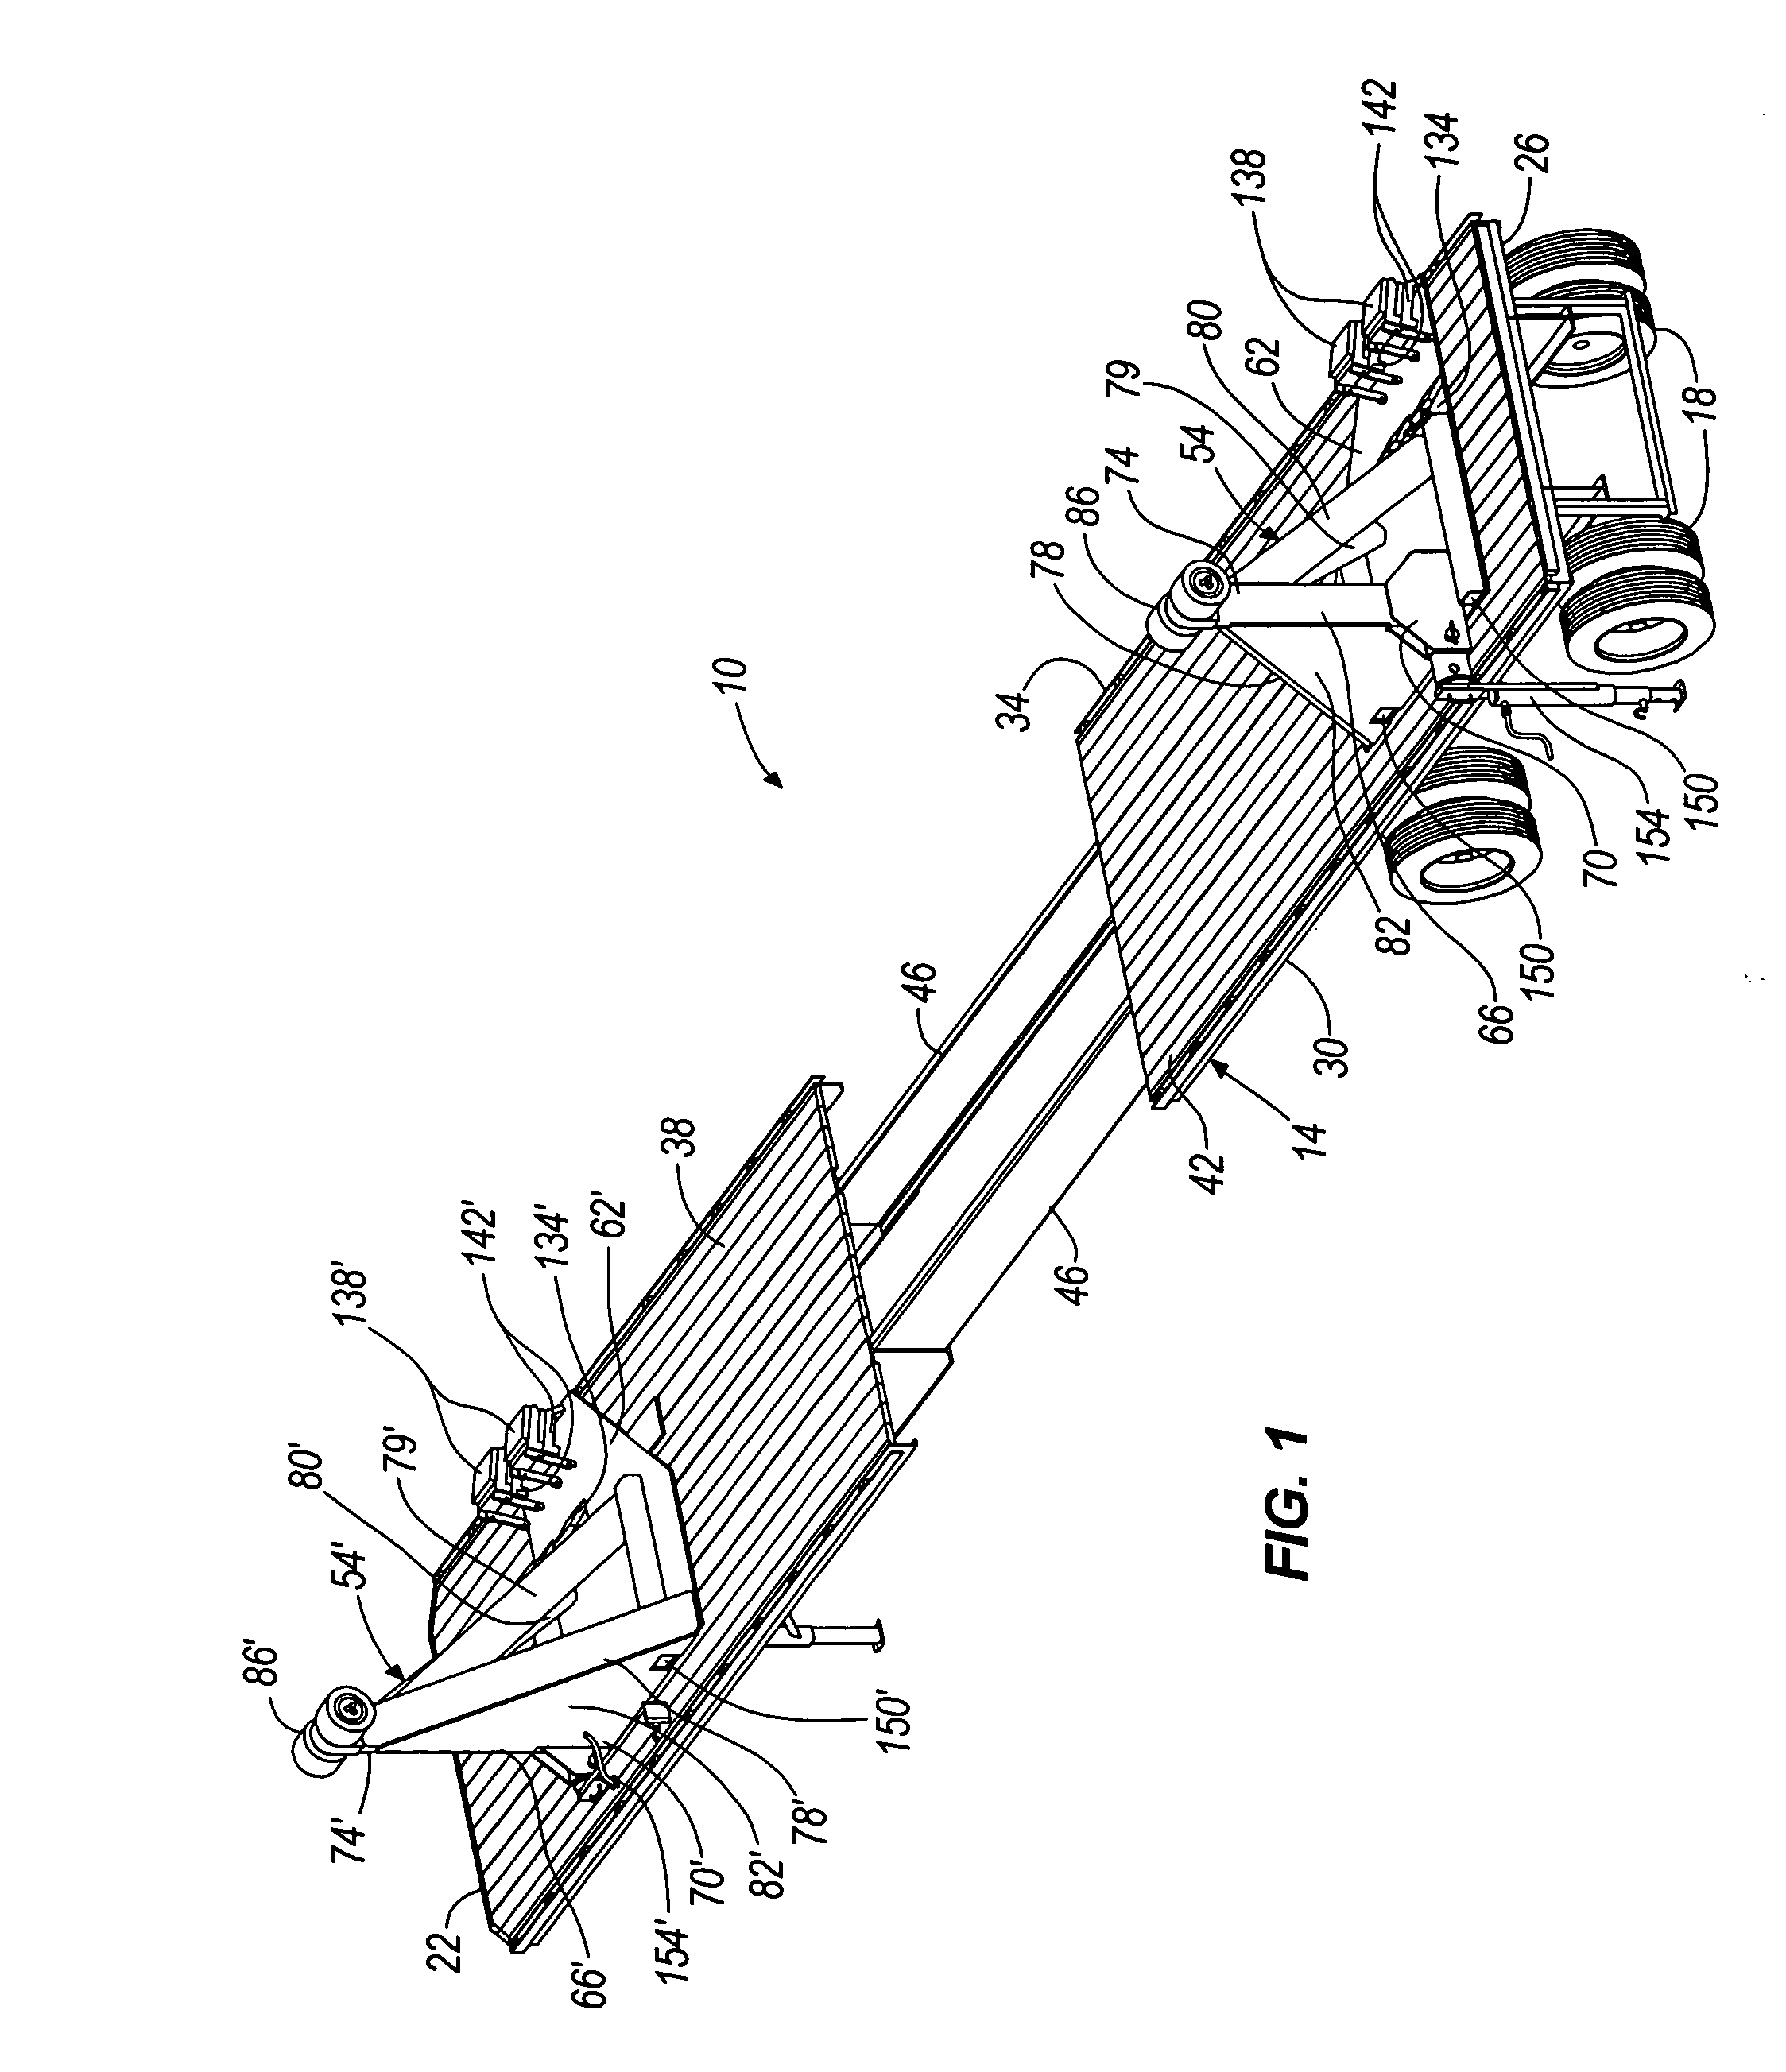 Support structure apparatus and method